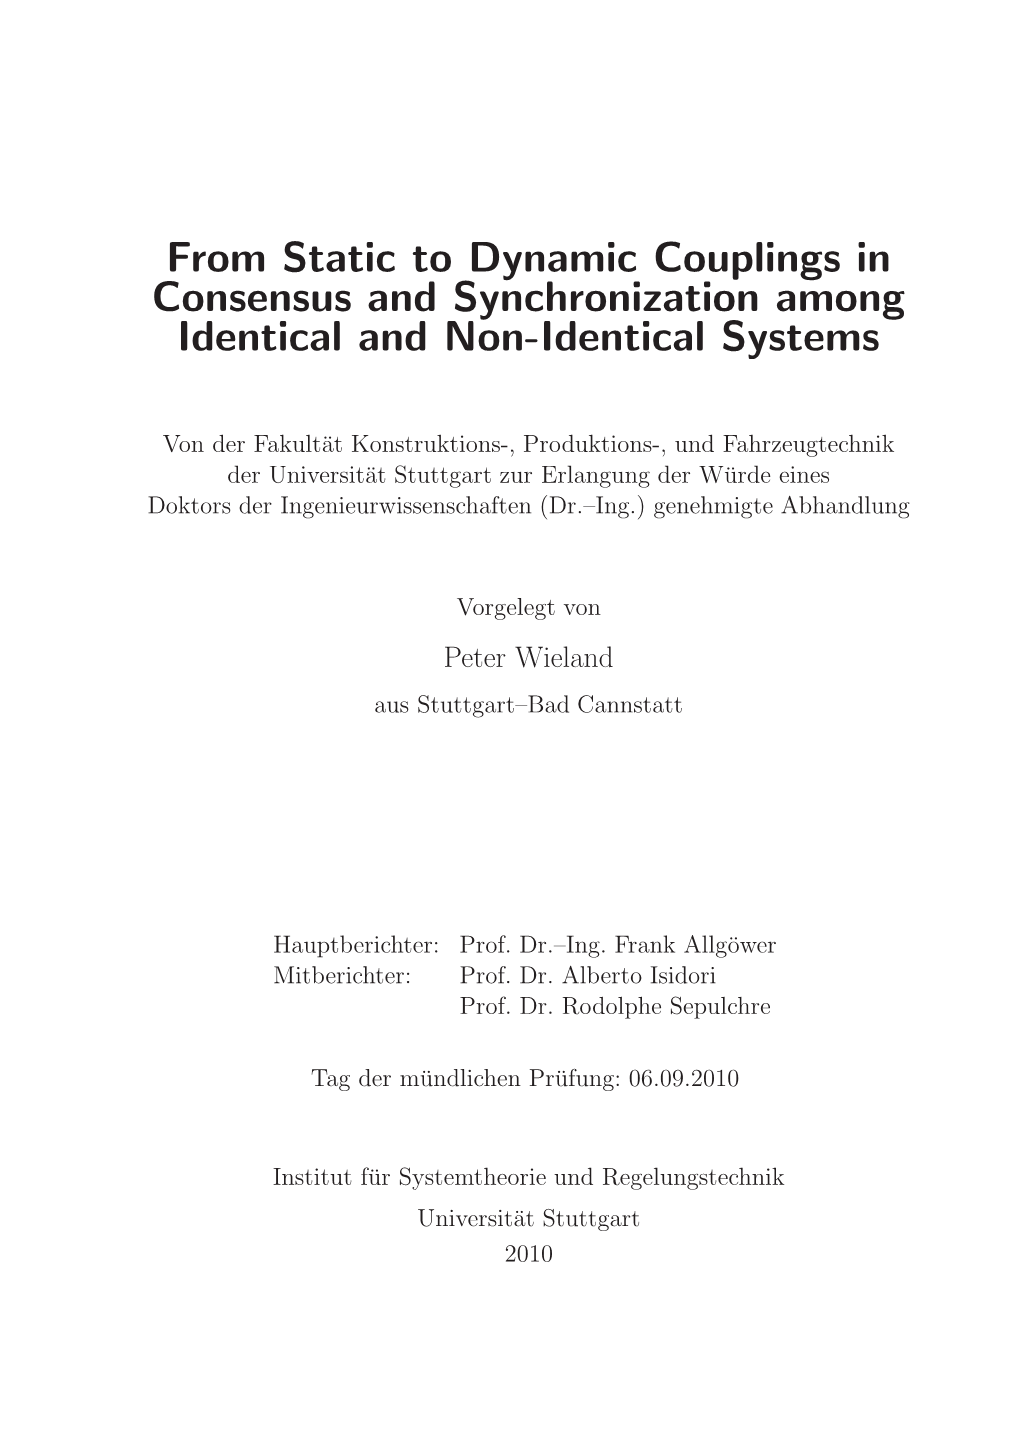 From Static to Dynamic Couplings in Consensus and Synchronization Among Identical and Non-Identical Systems